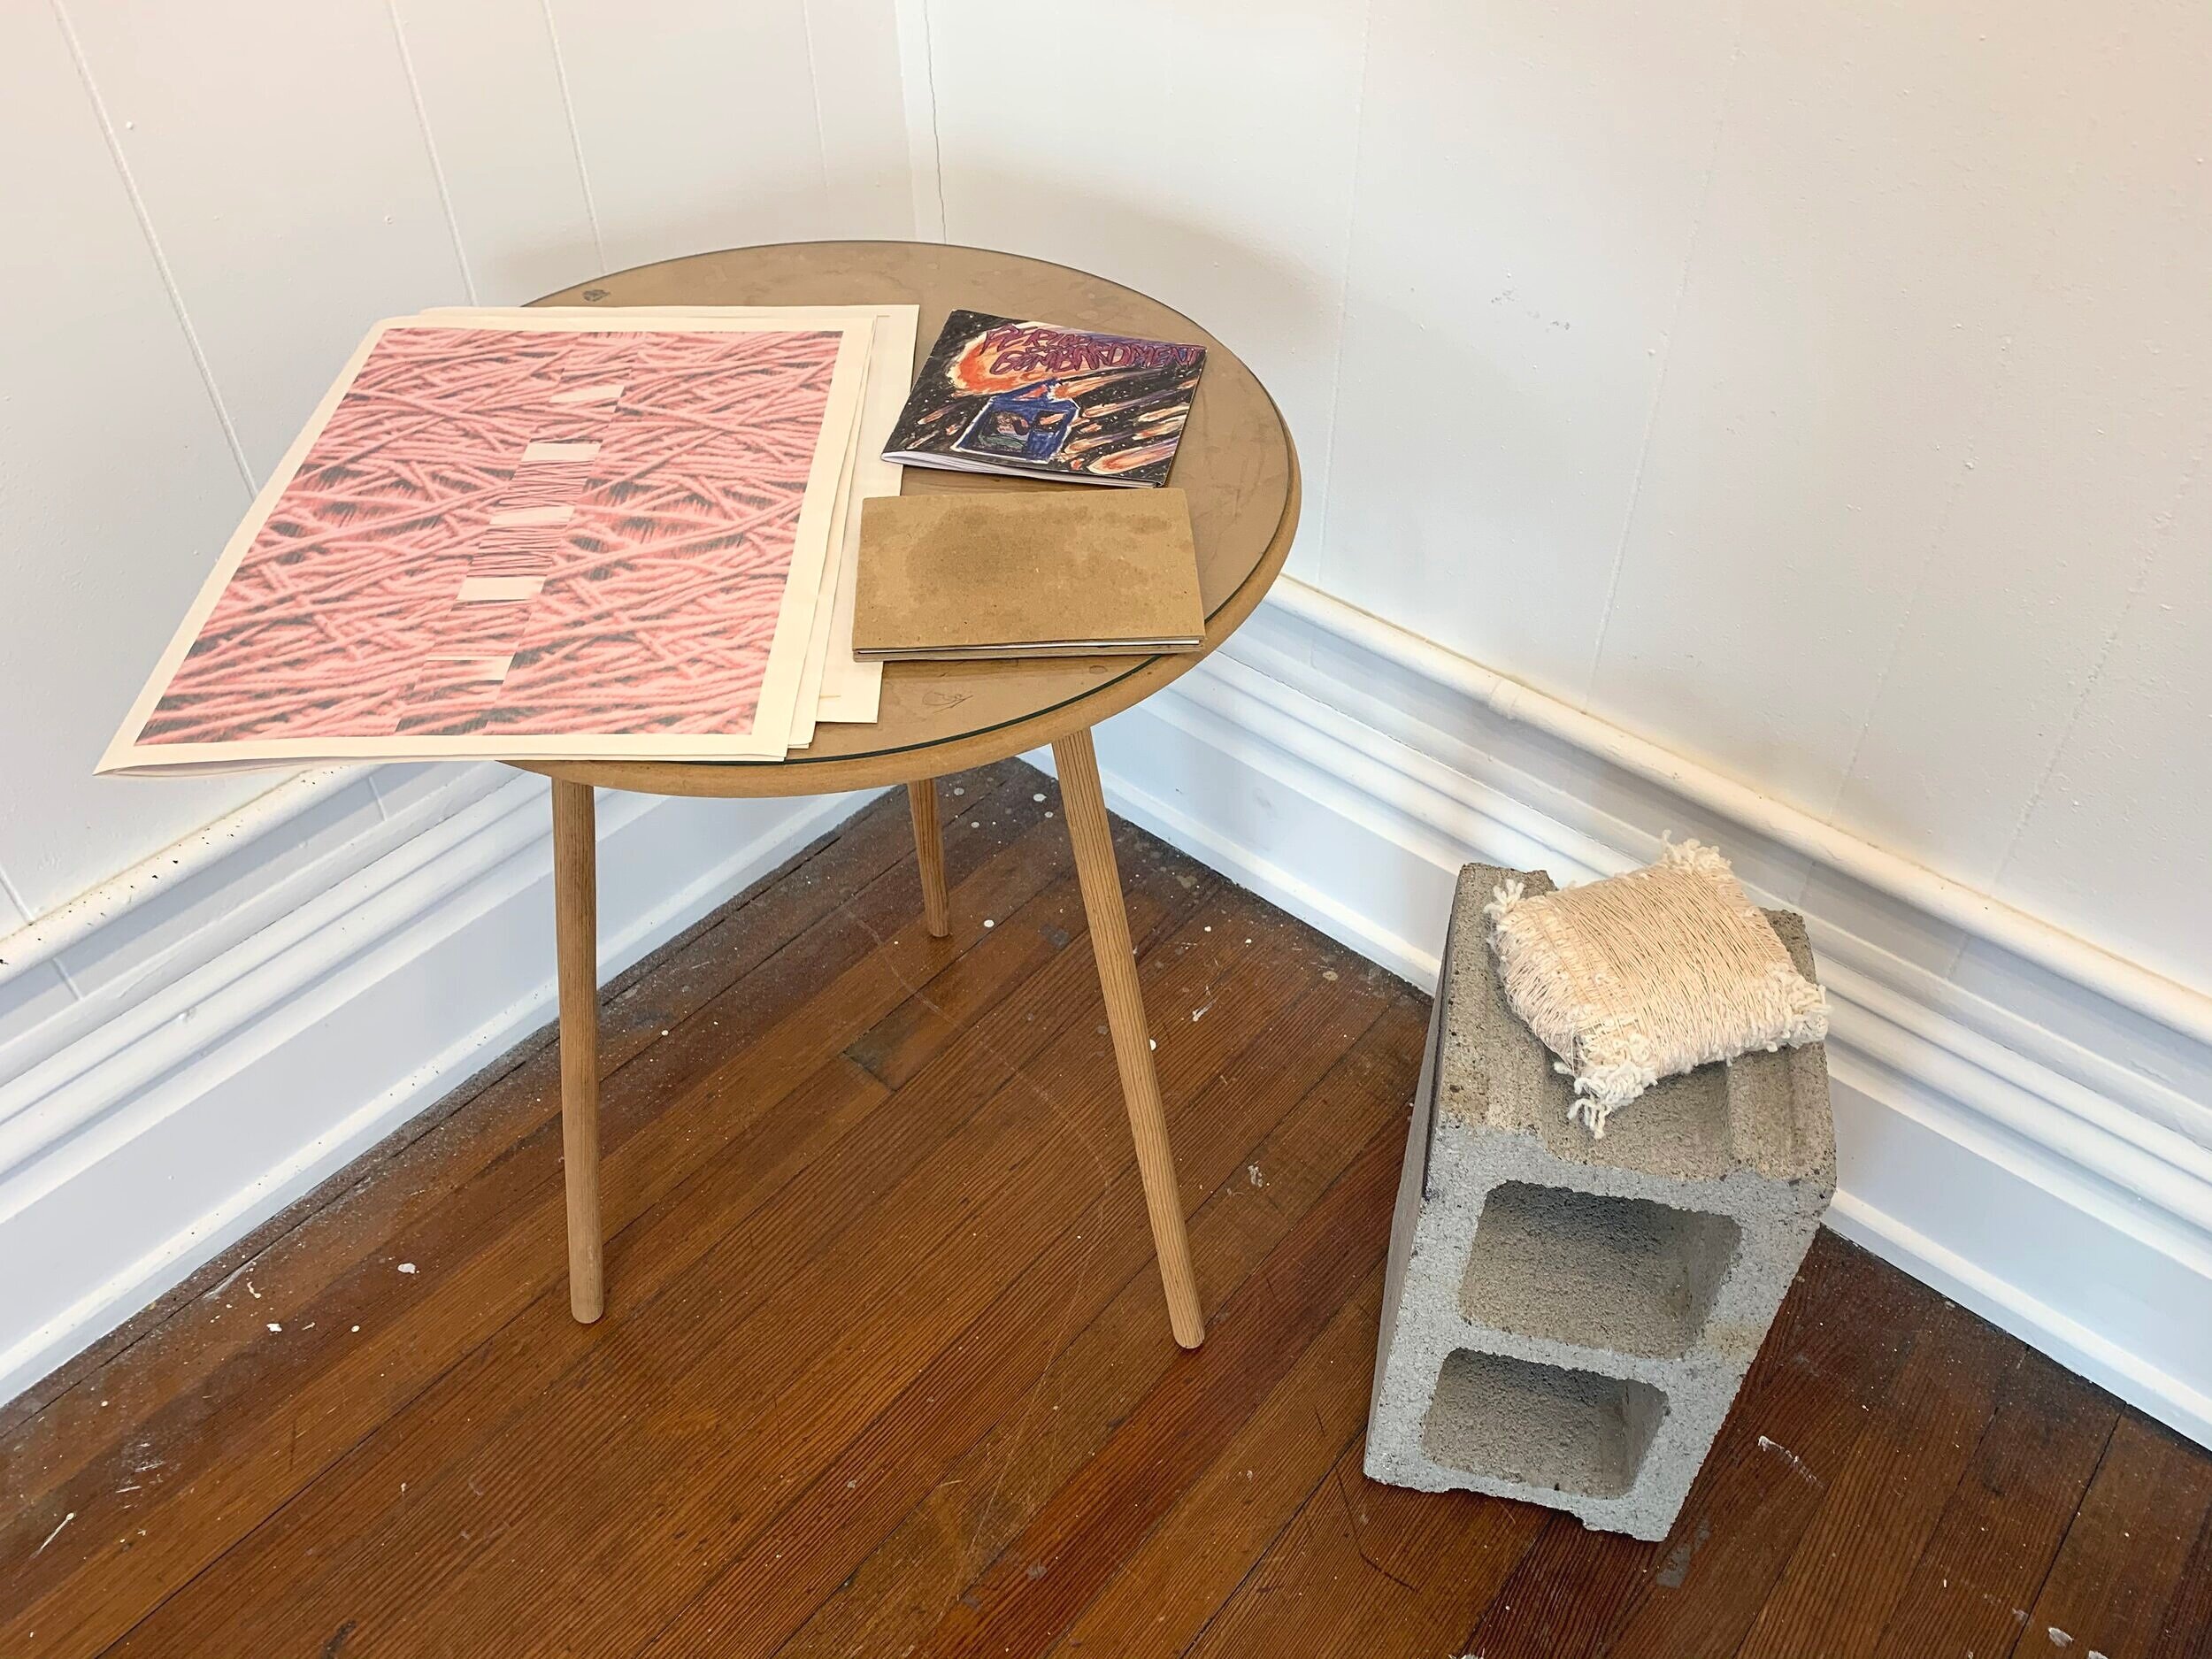  (left to right and top to bottom) Kat Friedman -  Apart , 2018; Haylie Jimenez -  Period of Bombardment , 2019; Quin Crumb  Untitled;  Kat Friedman  Untitled  